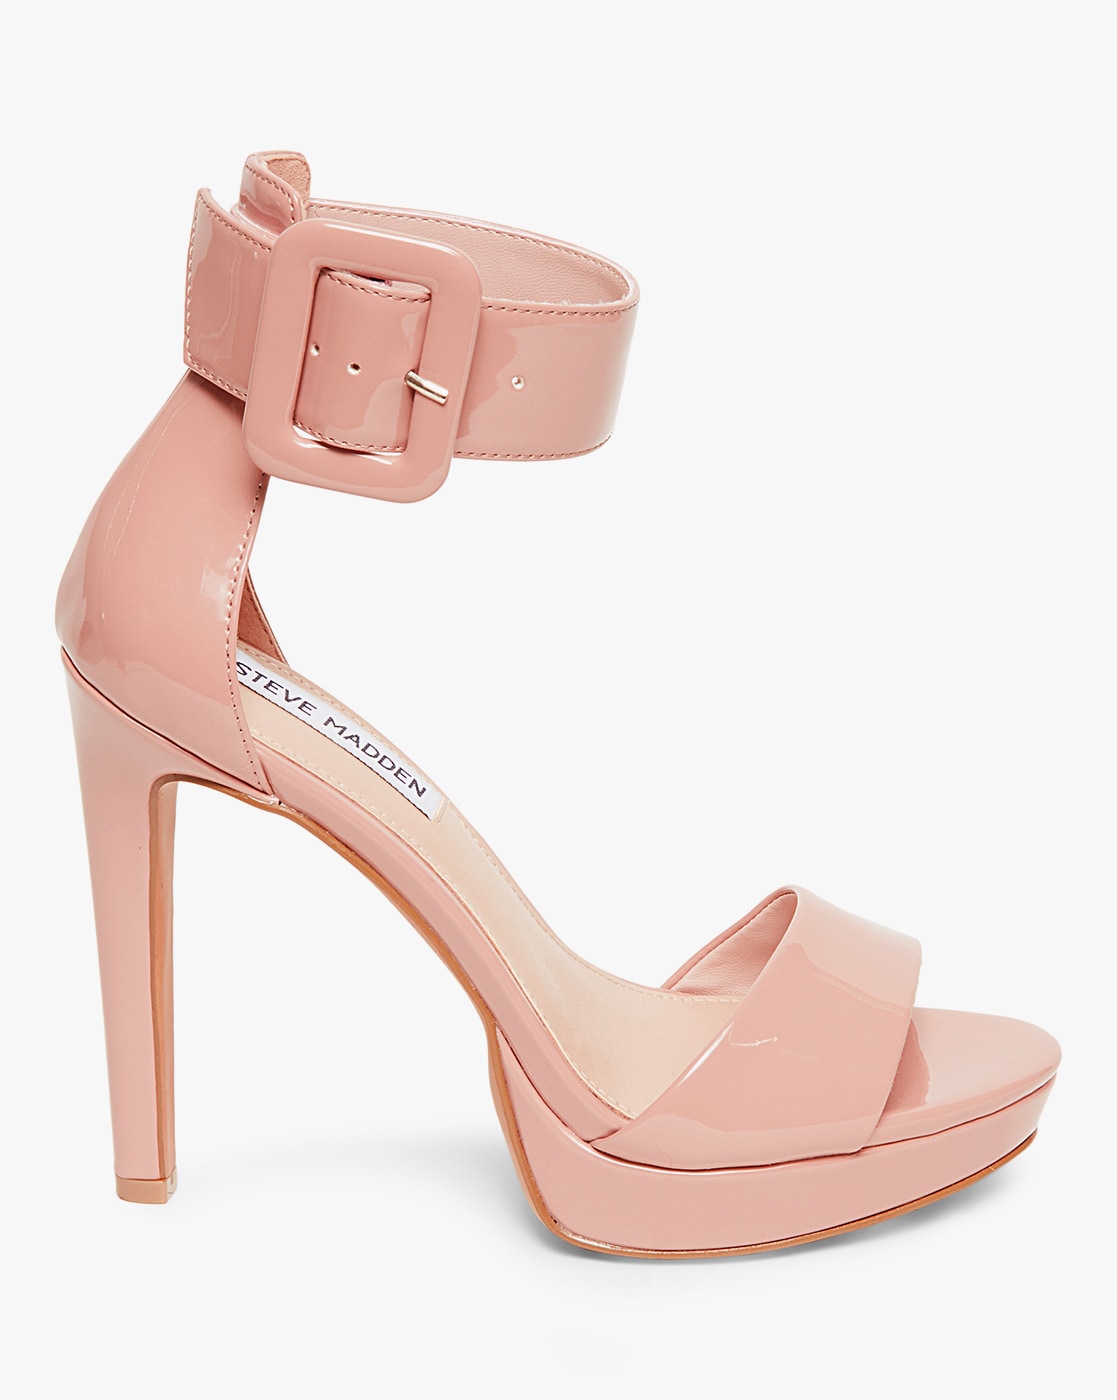 Buy Peach Heeled Sandals for Women by 